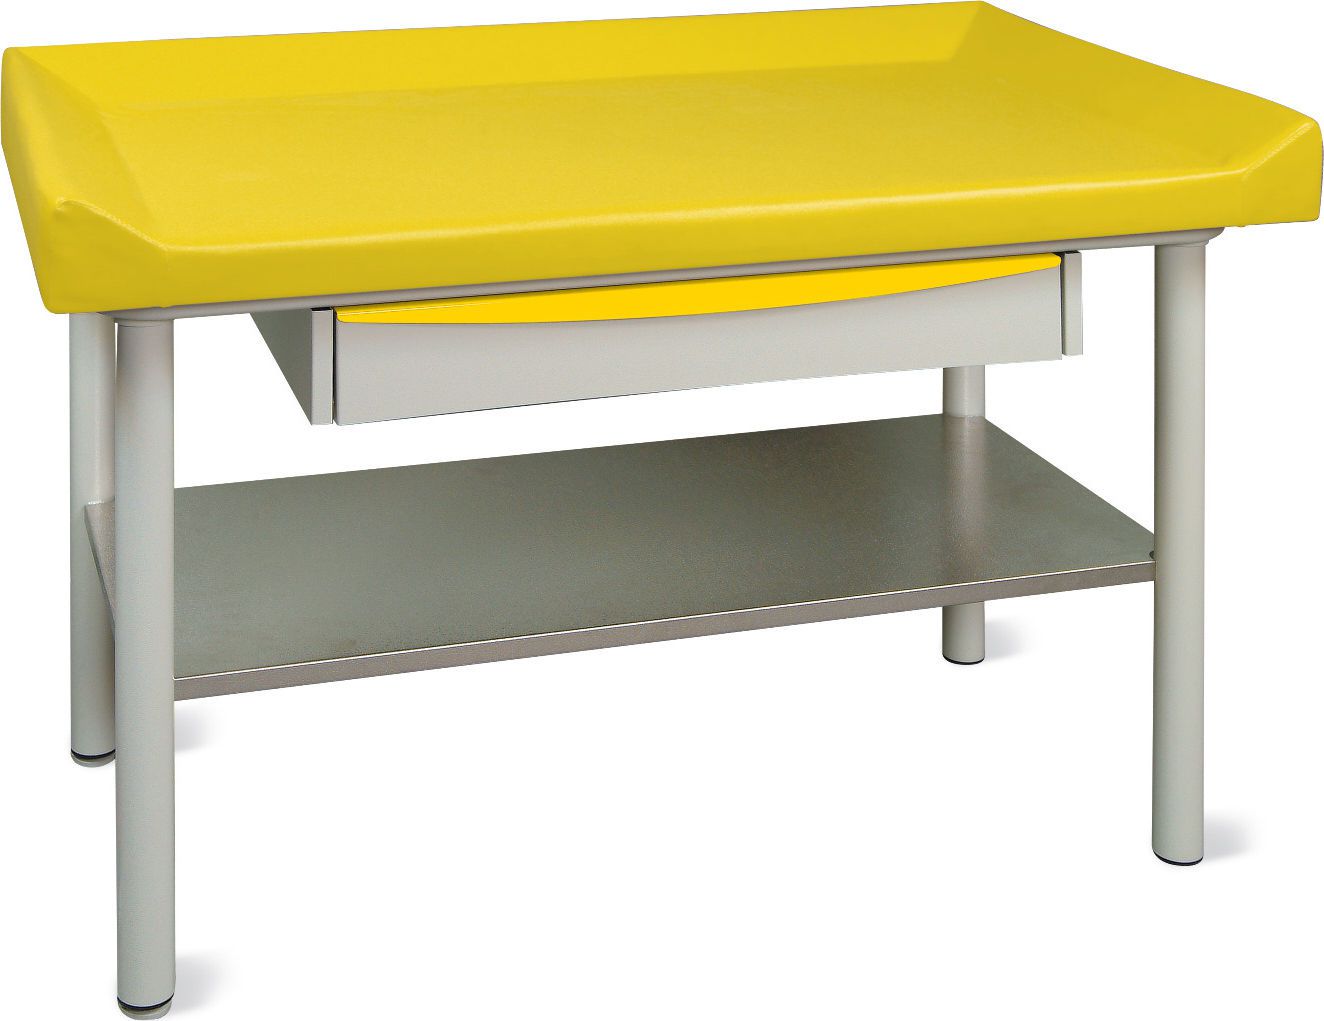 Pediatric examination table / fixed / 1-section 4365 Promotal